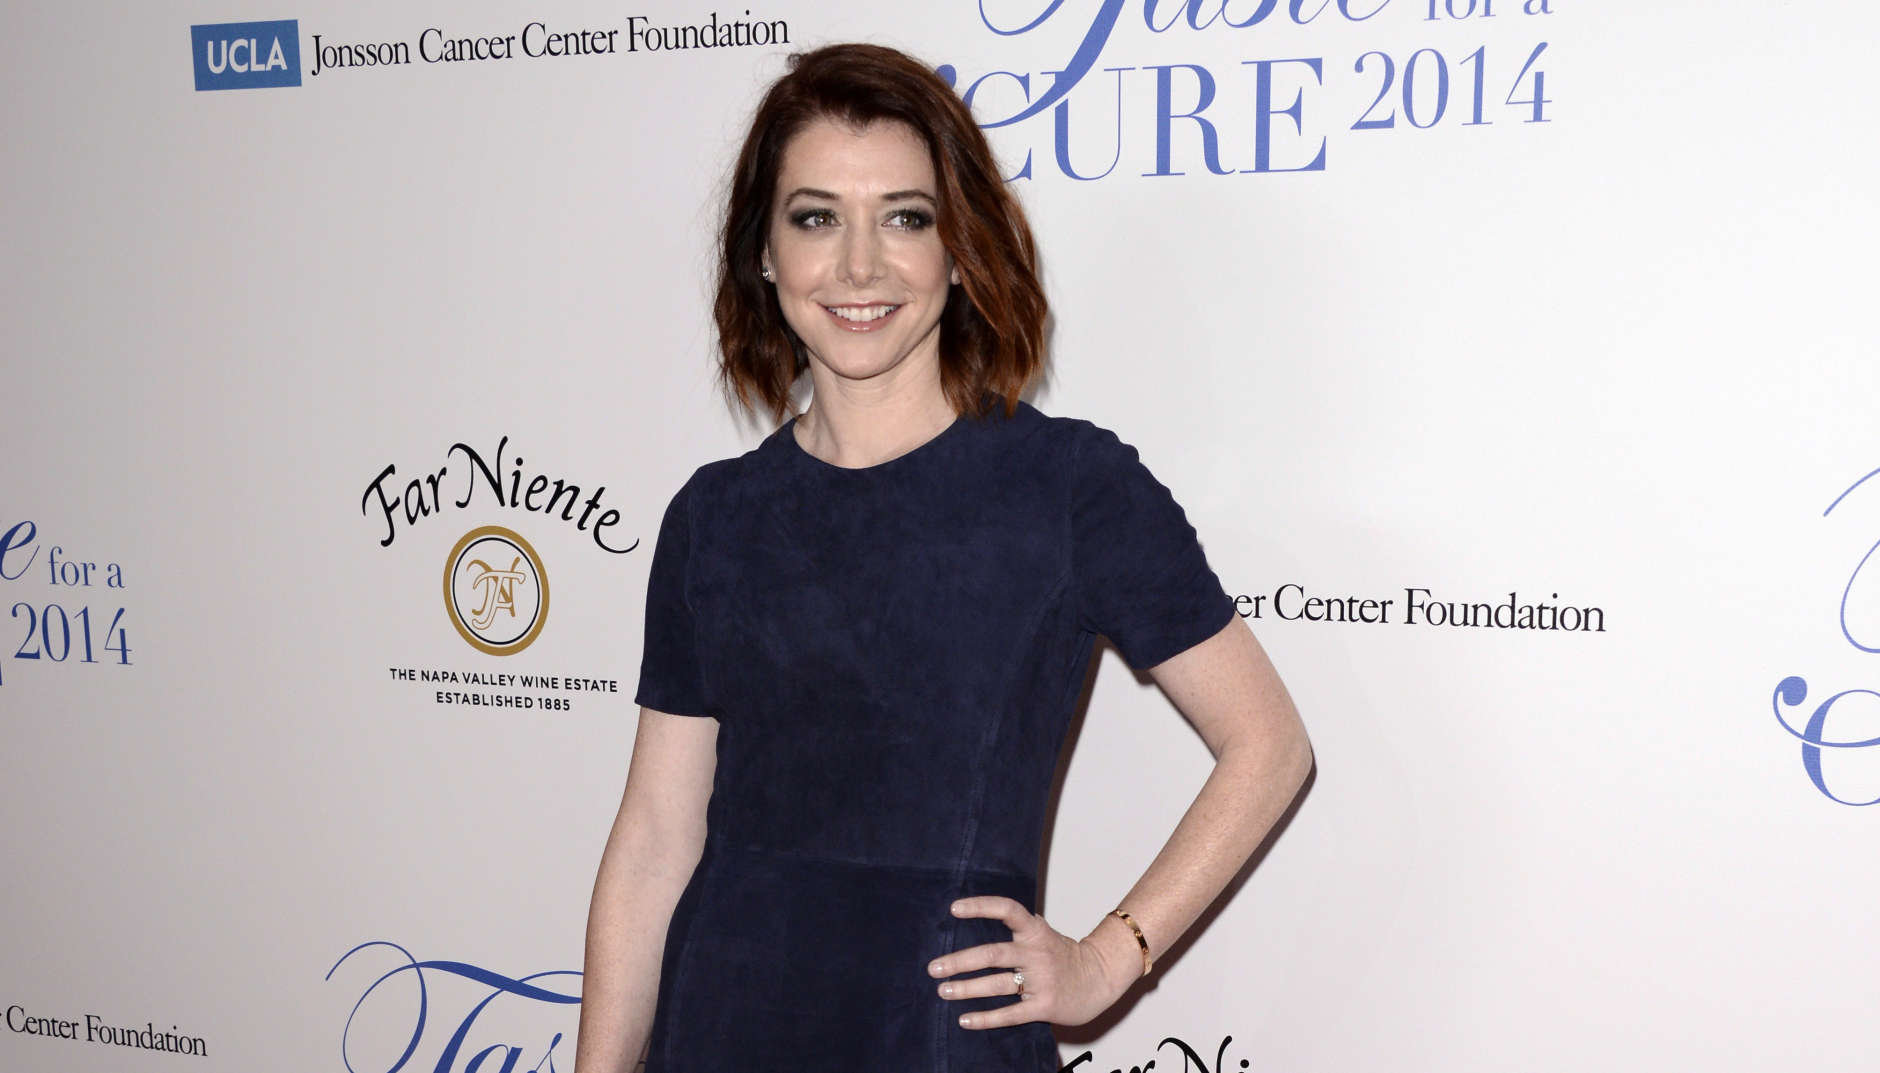 Actress Alyson Hannigan is 43 on March 24. (Photo by Dan Steinberg/Invision/AP)